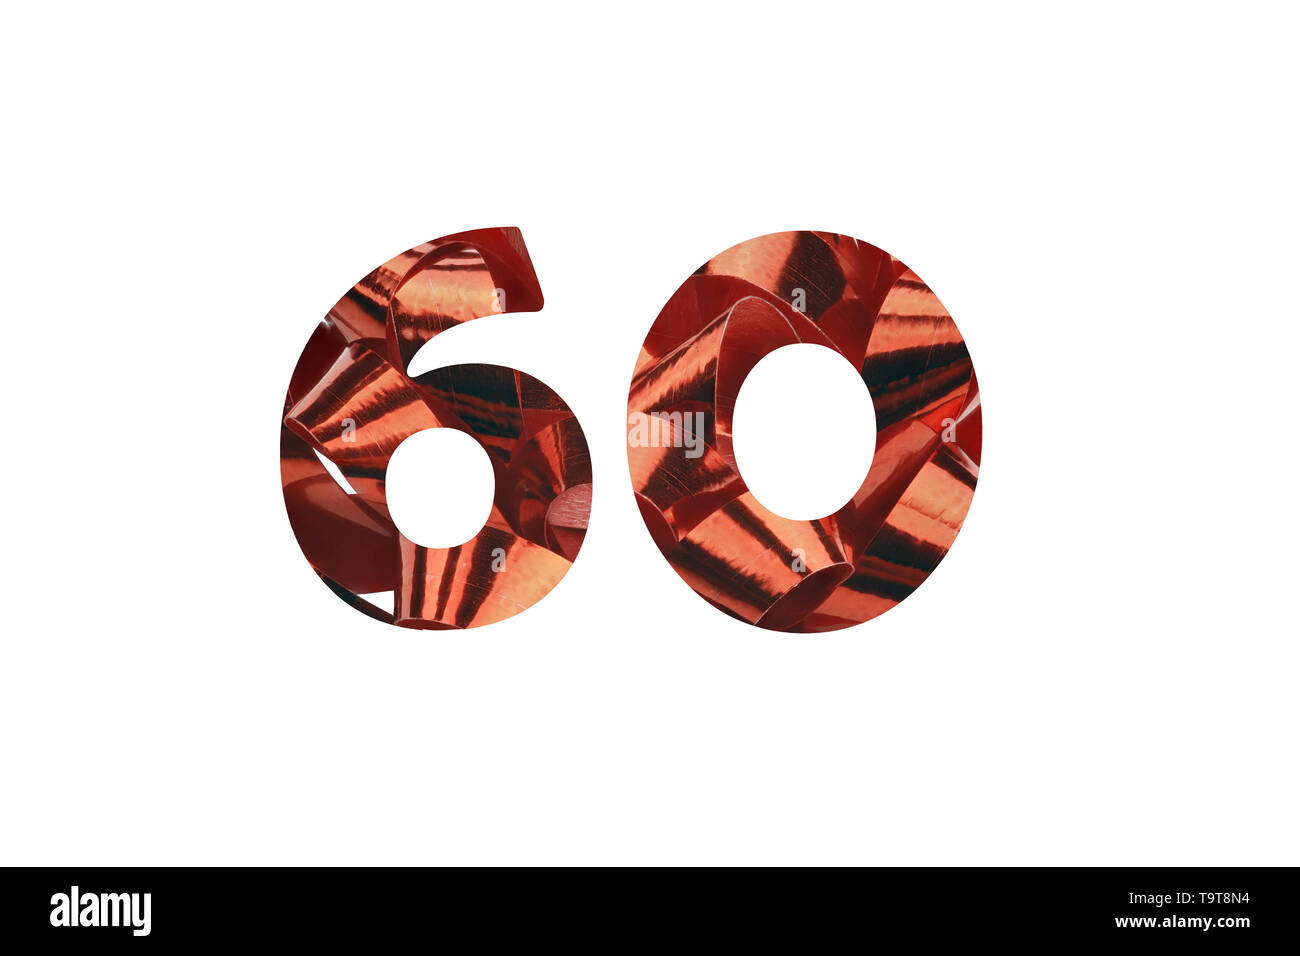 Number 60 - Photograph of a red gift loop in close-up with number 60 cut out Stock Photo